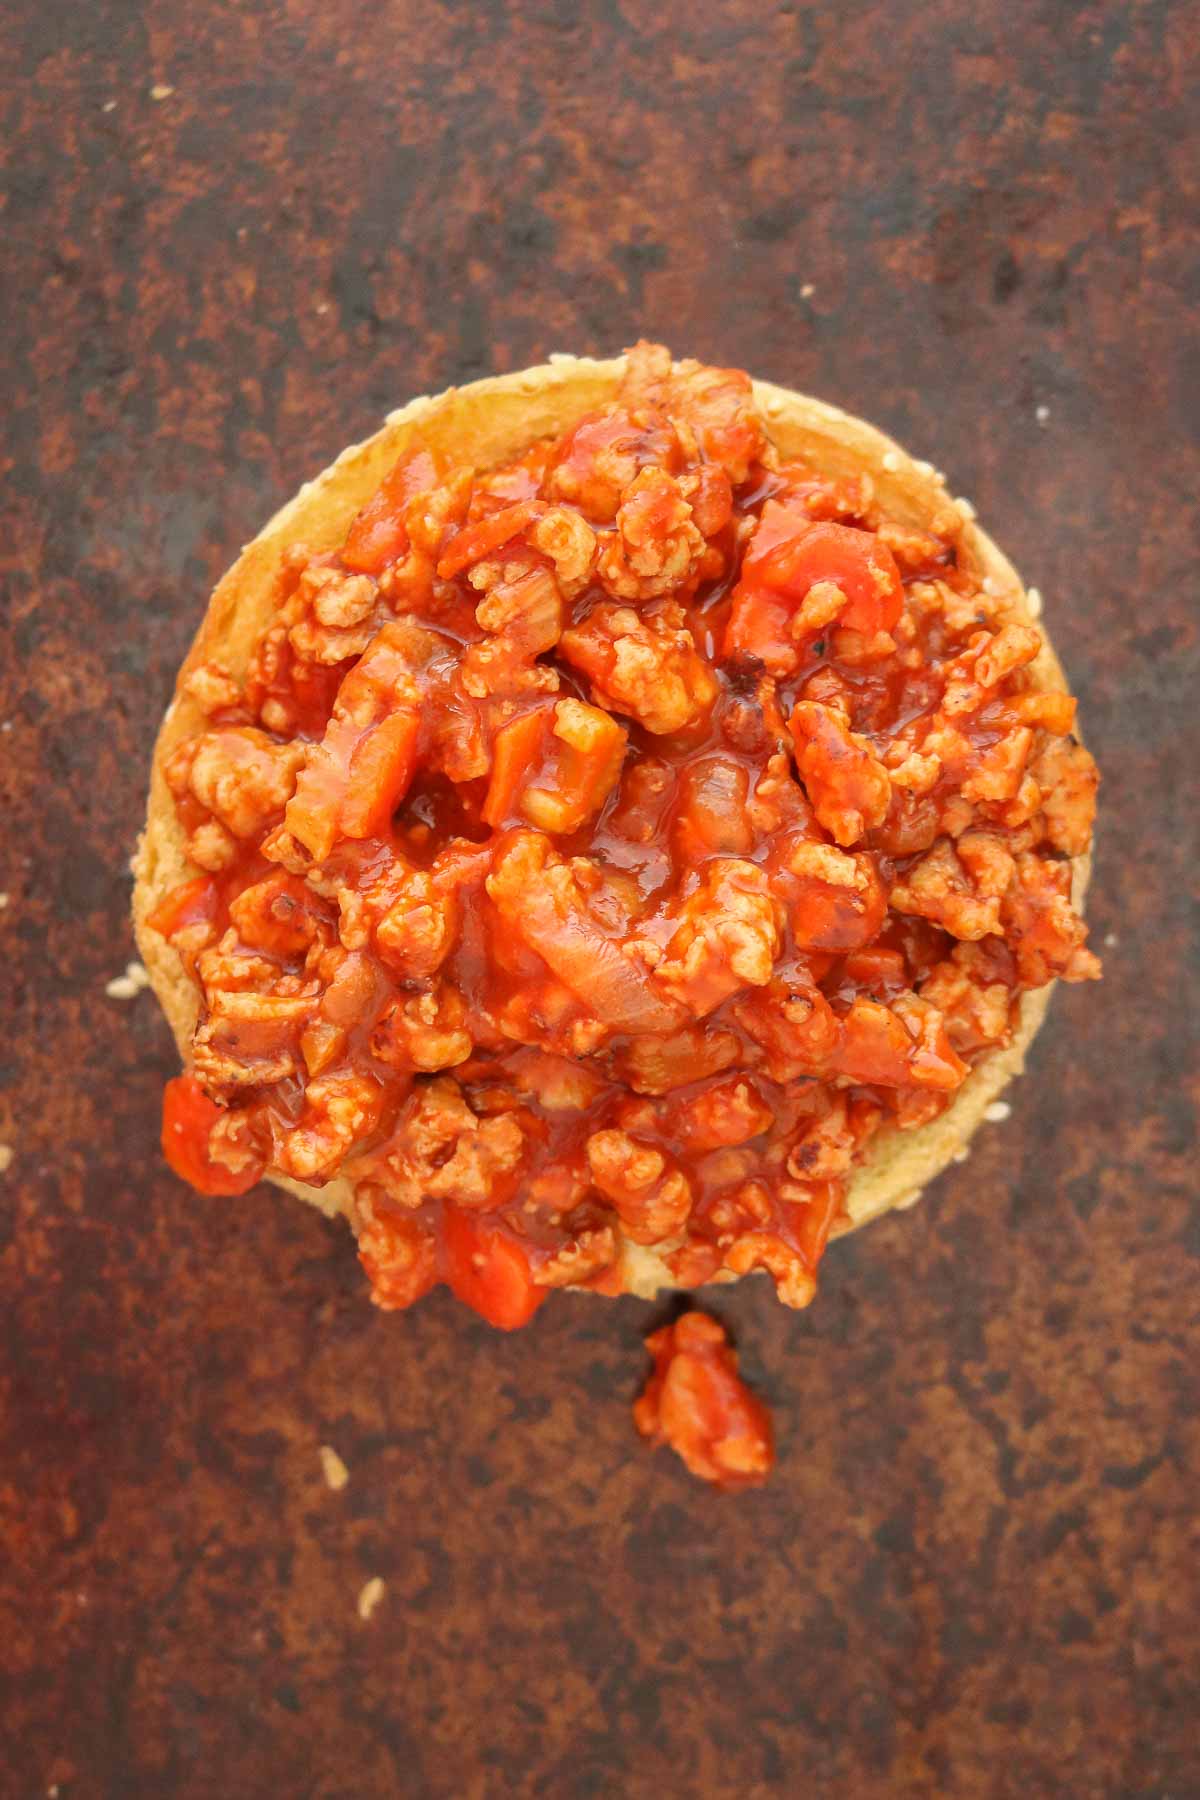 Sloppy joe mixture on a bun before the top bun is place over top.